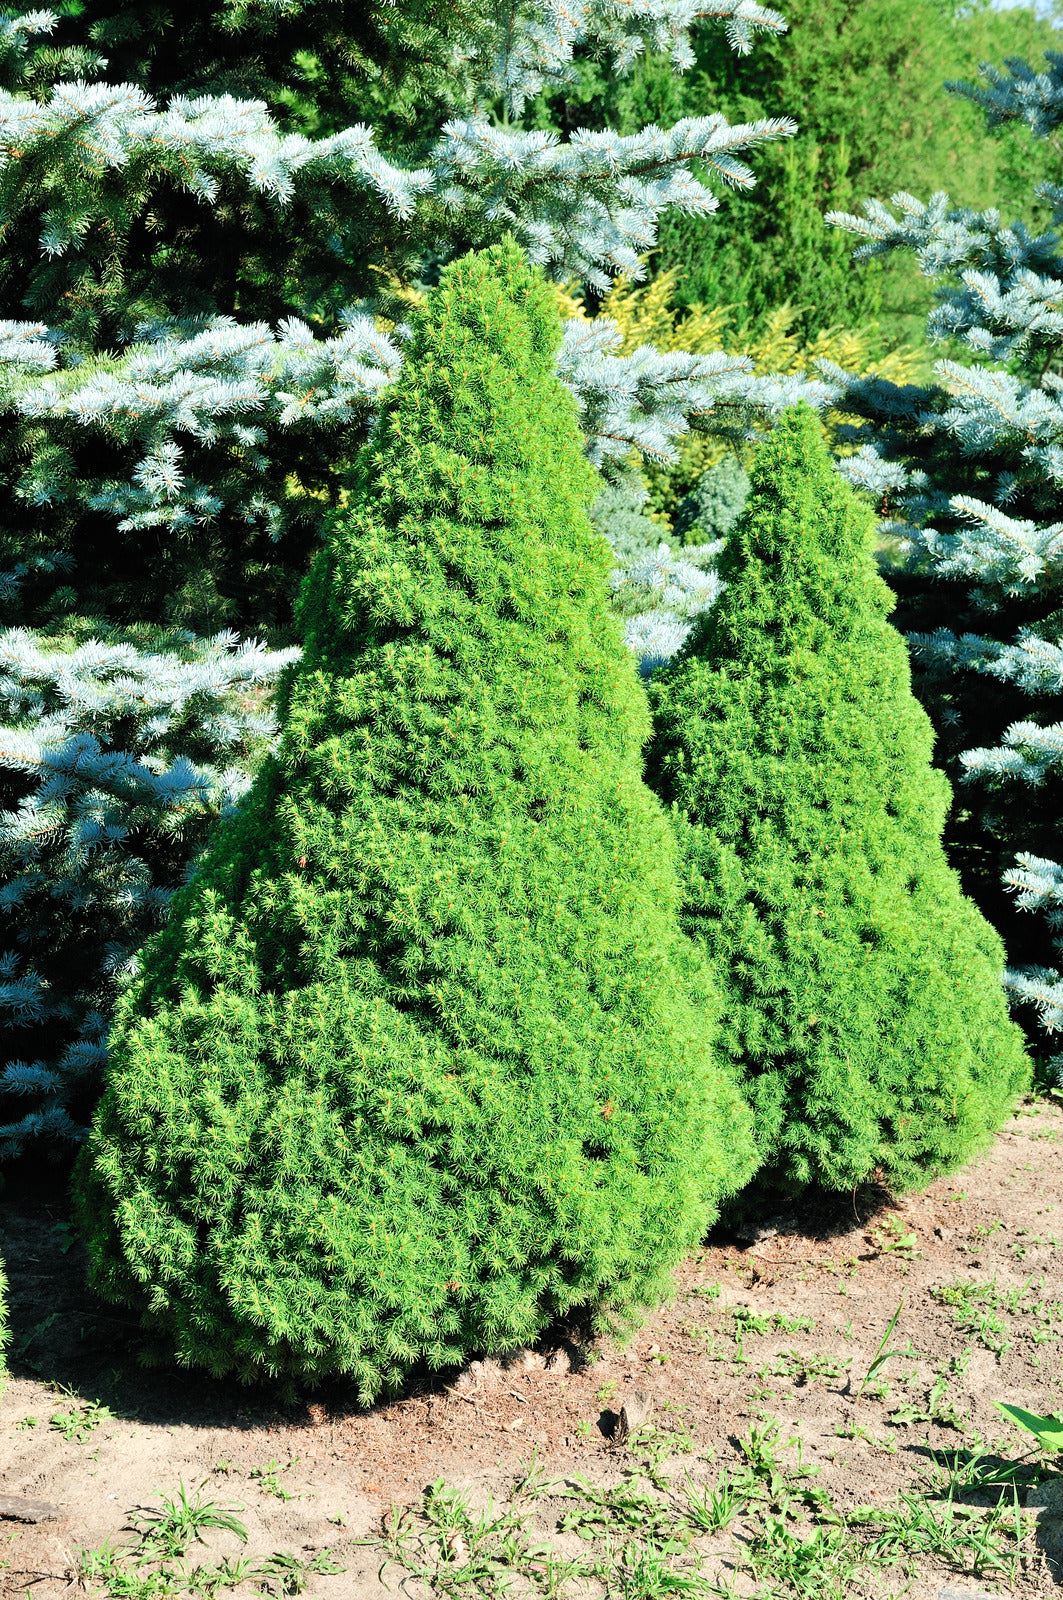 PICEA GLAUCA JEAN'S DILLY® / JEAN'S DILLY® ALBERTA SPRUCE